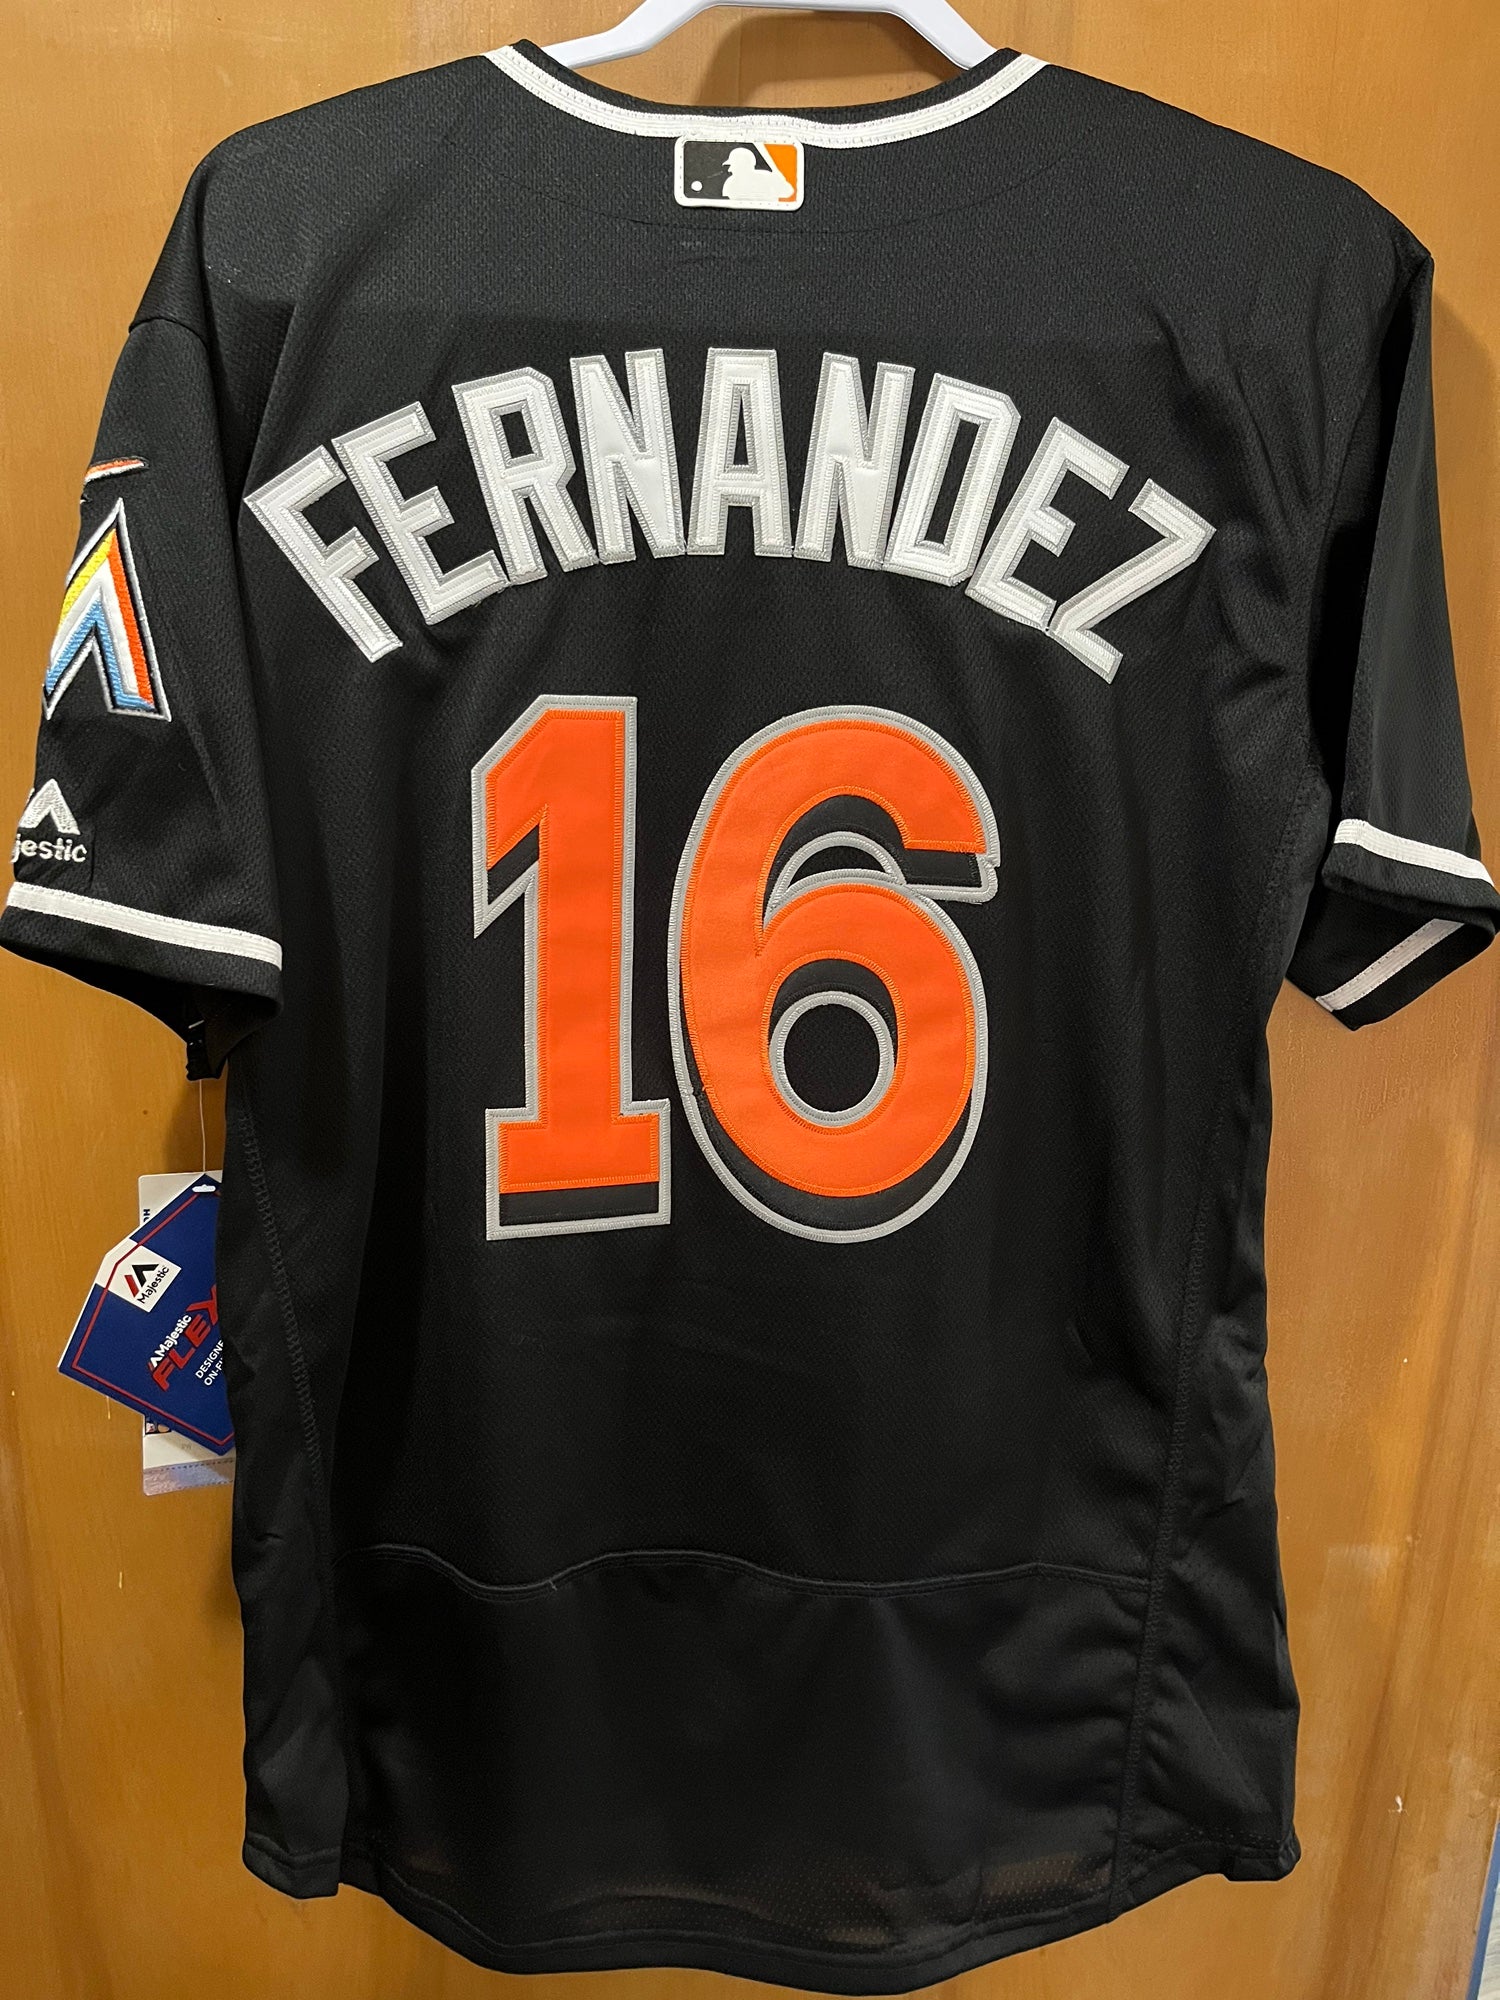 miami marlins jose fernandez t shirt size S very clean condition